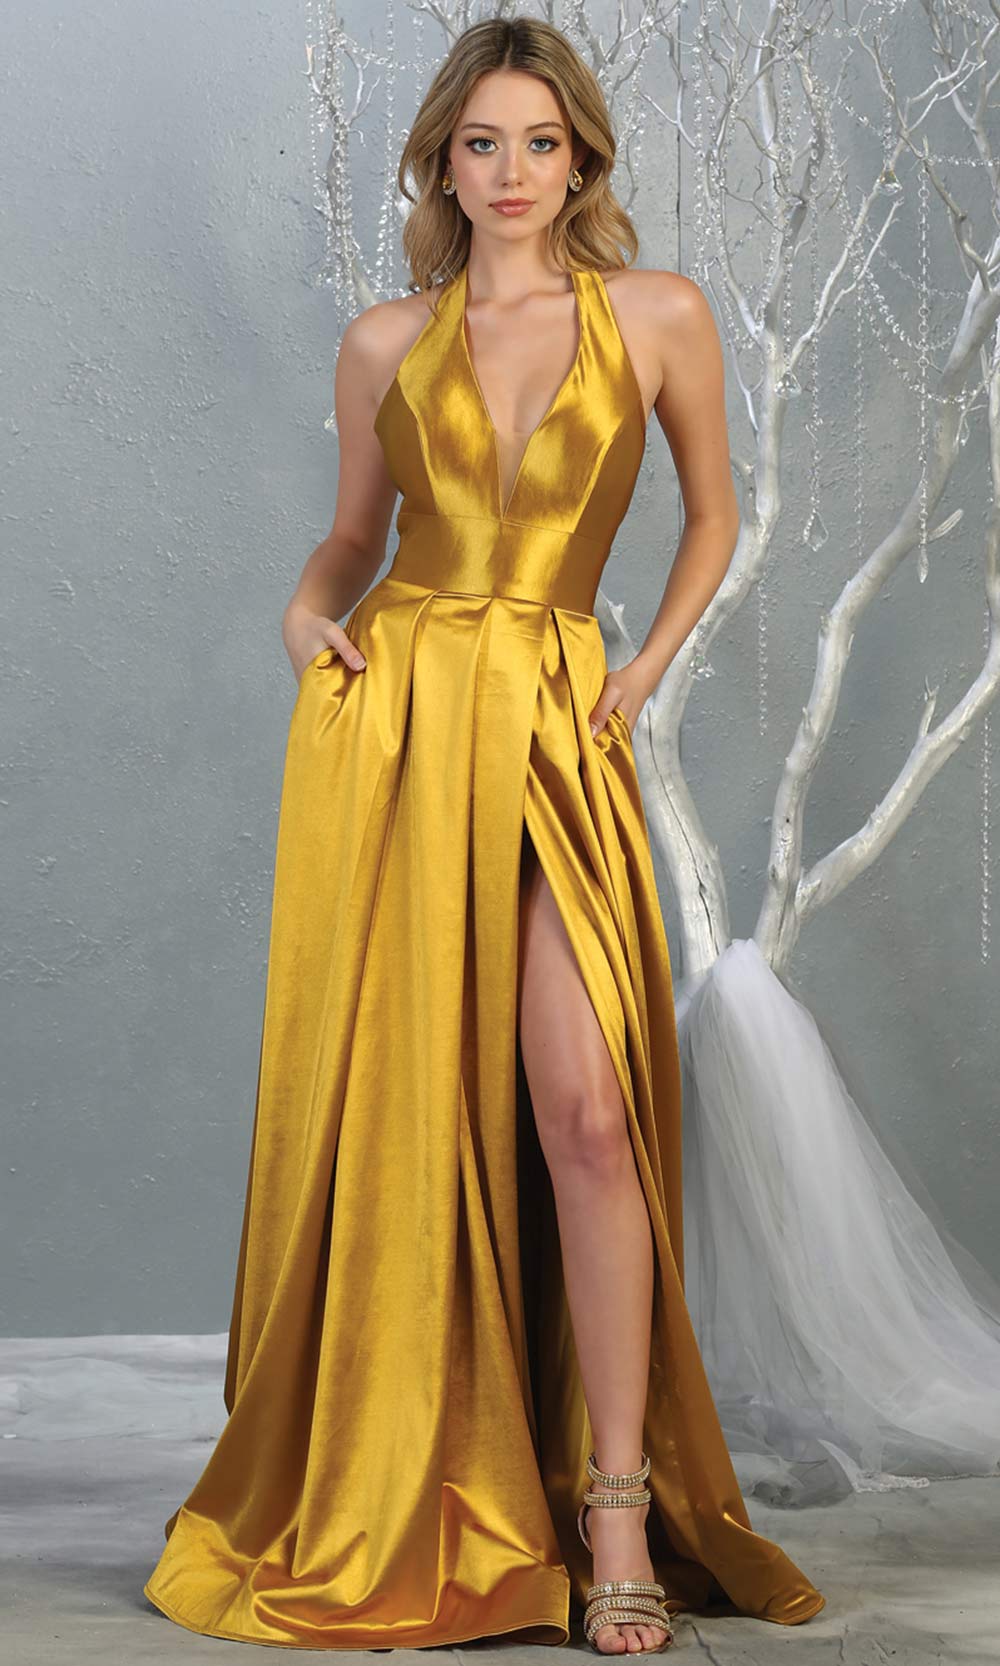 Mayqueen MQ 1741 long metallic gold halter evening flowy dress w/low back & high slit. Full length gold satin gown is perfect for enagagement/e-shoot dress,formal wedding guest, indowestern gown, evening party dress, prom, bridesmaid. Plus sizes avail.jpg